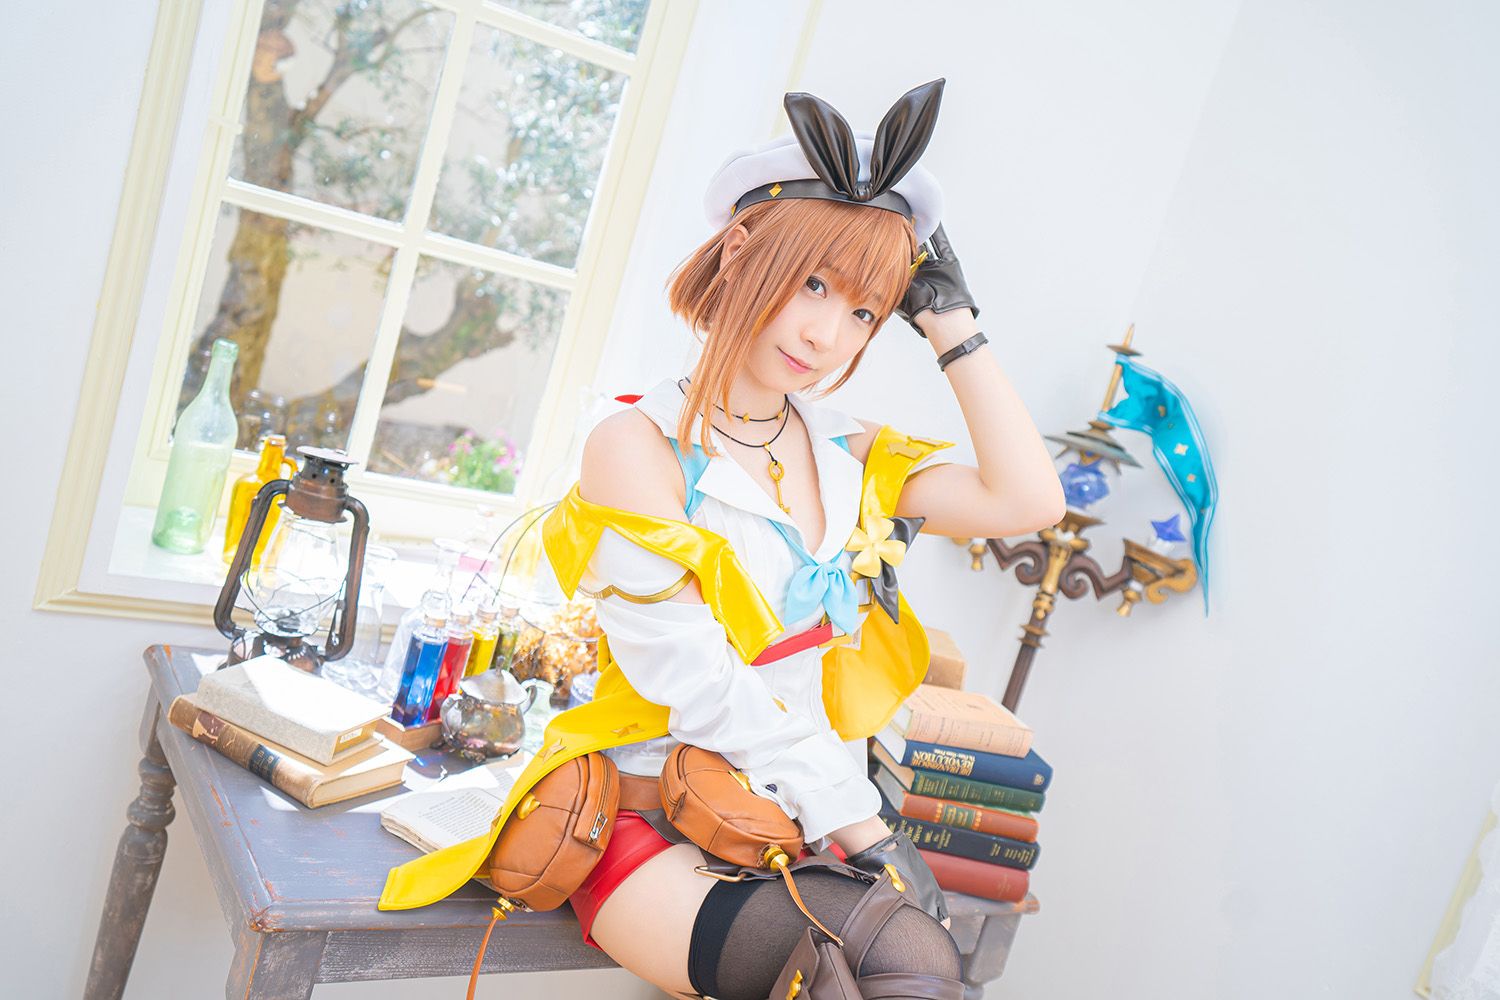 [Liza's Atelier 2] Iori Mo jacks the official site in cosplay that reproduces Liza's thighs! 12